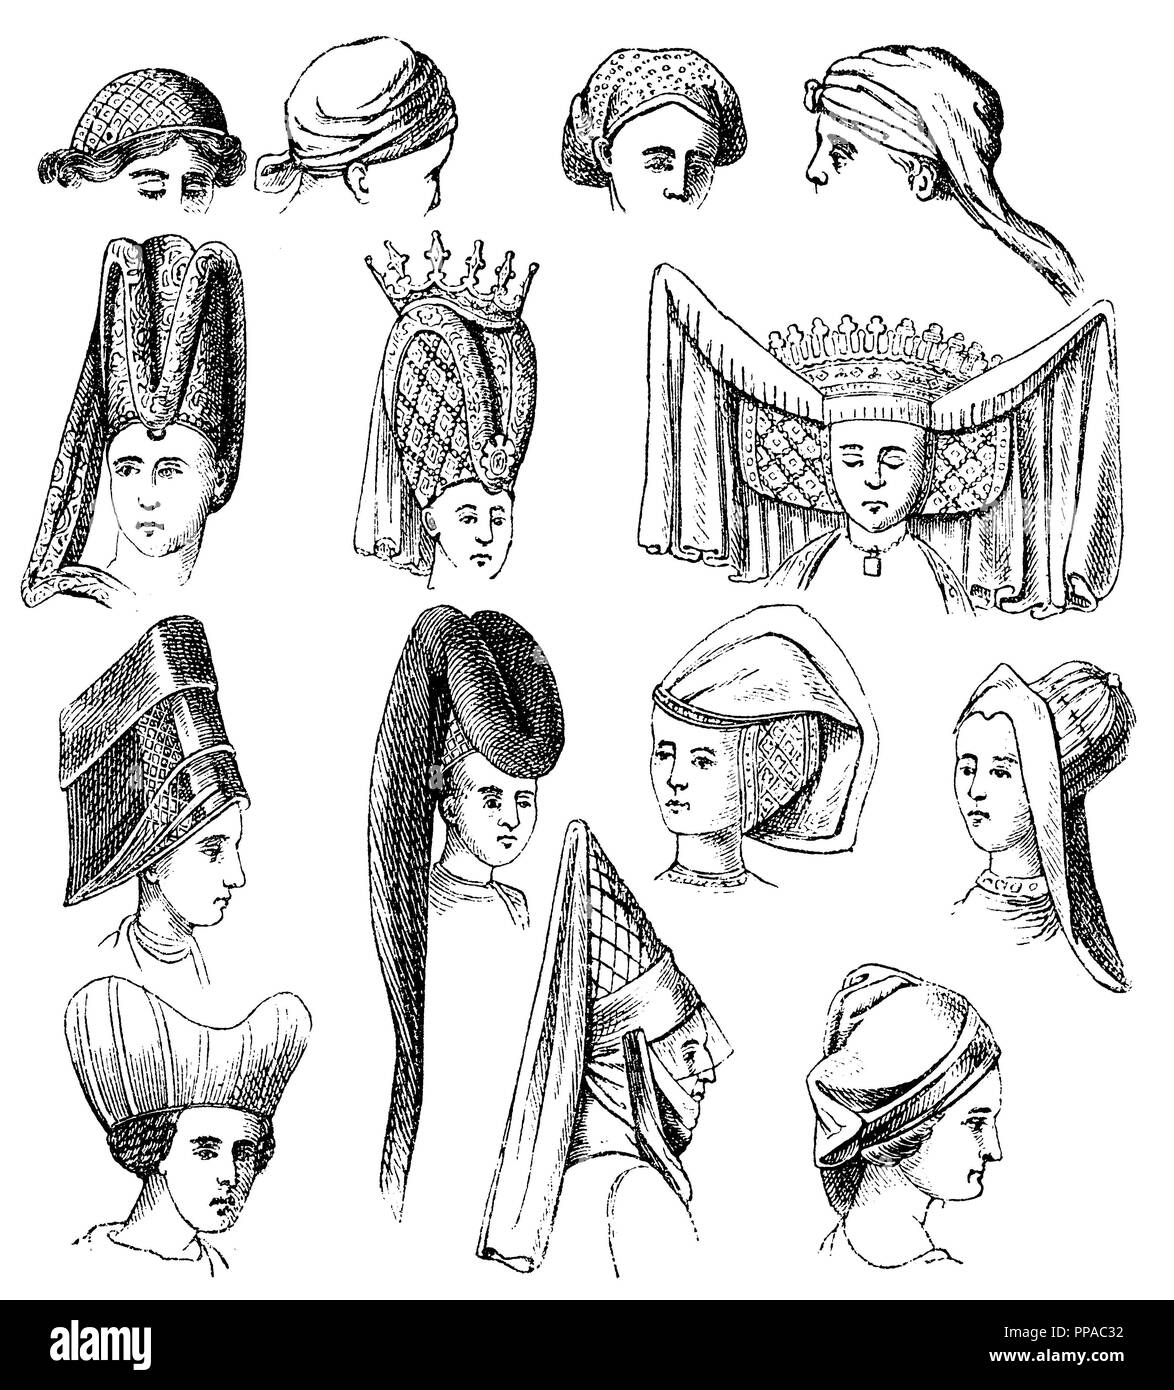 Hoods from different times, Stock Photo